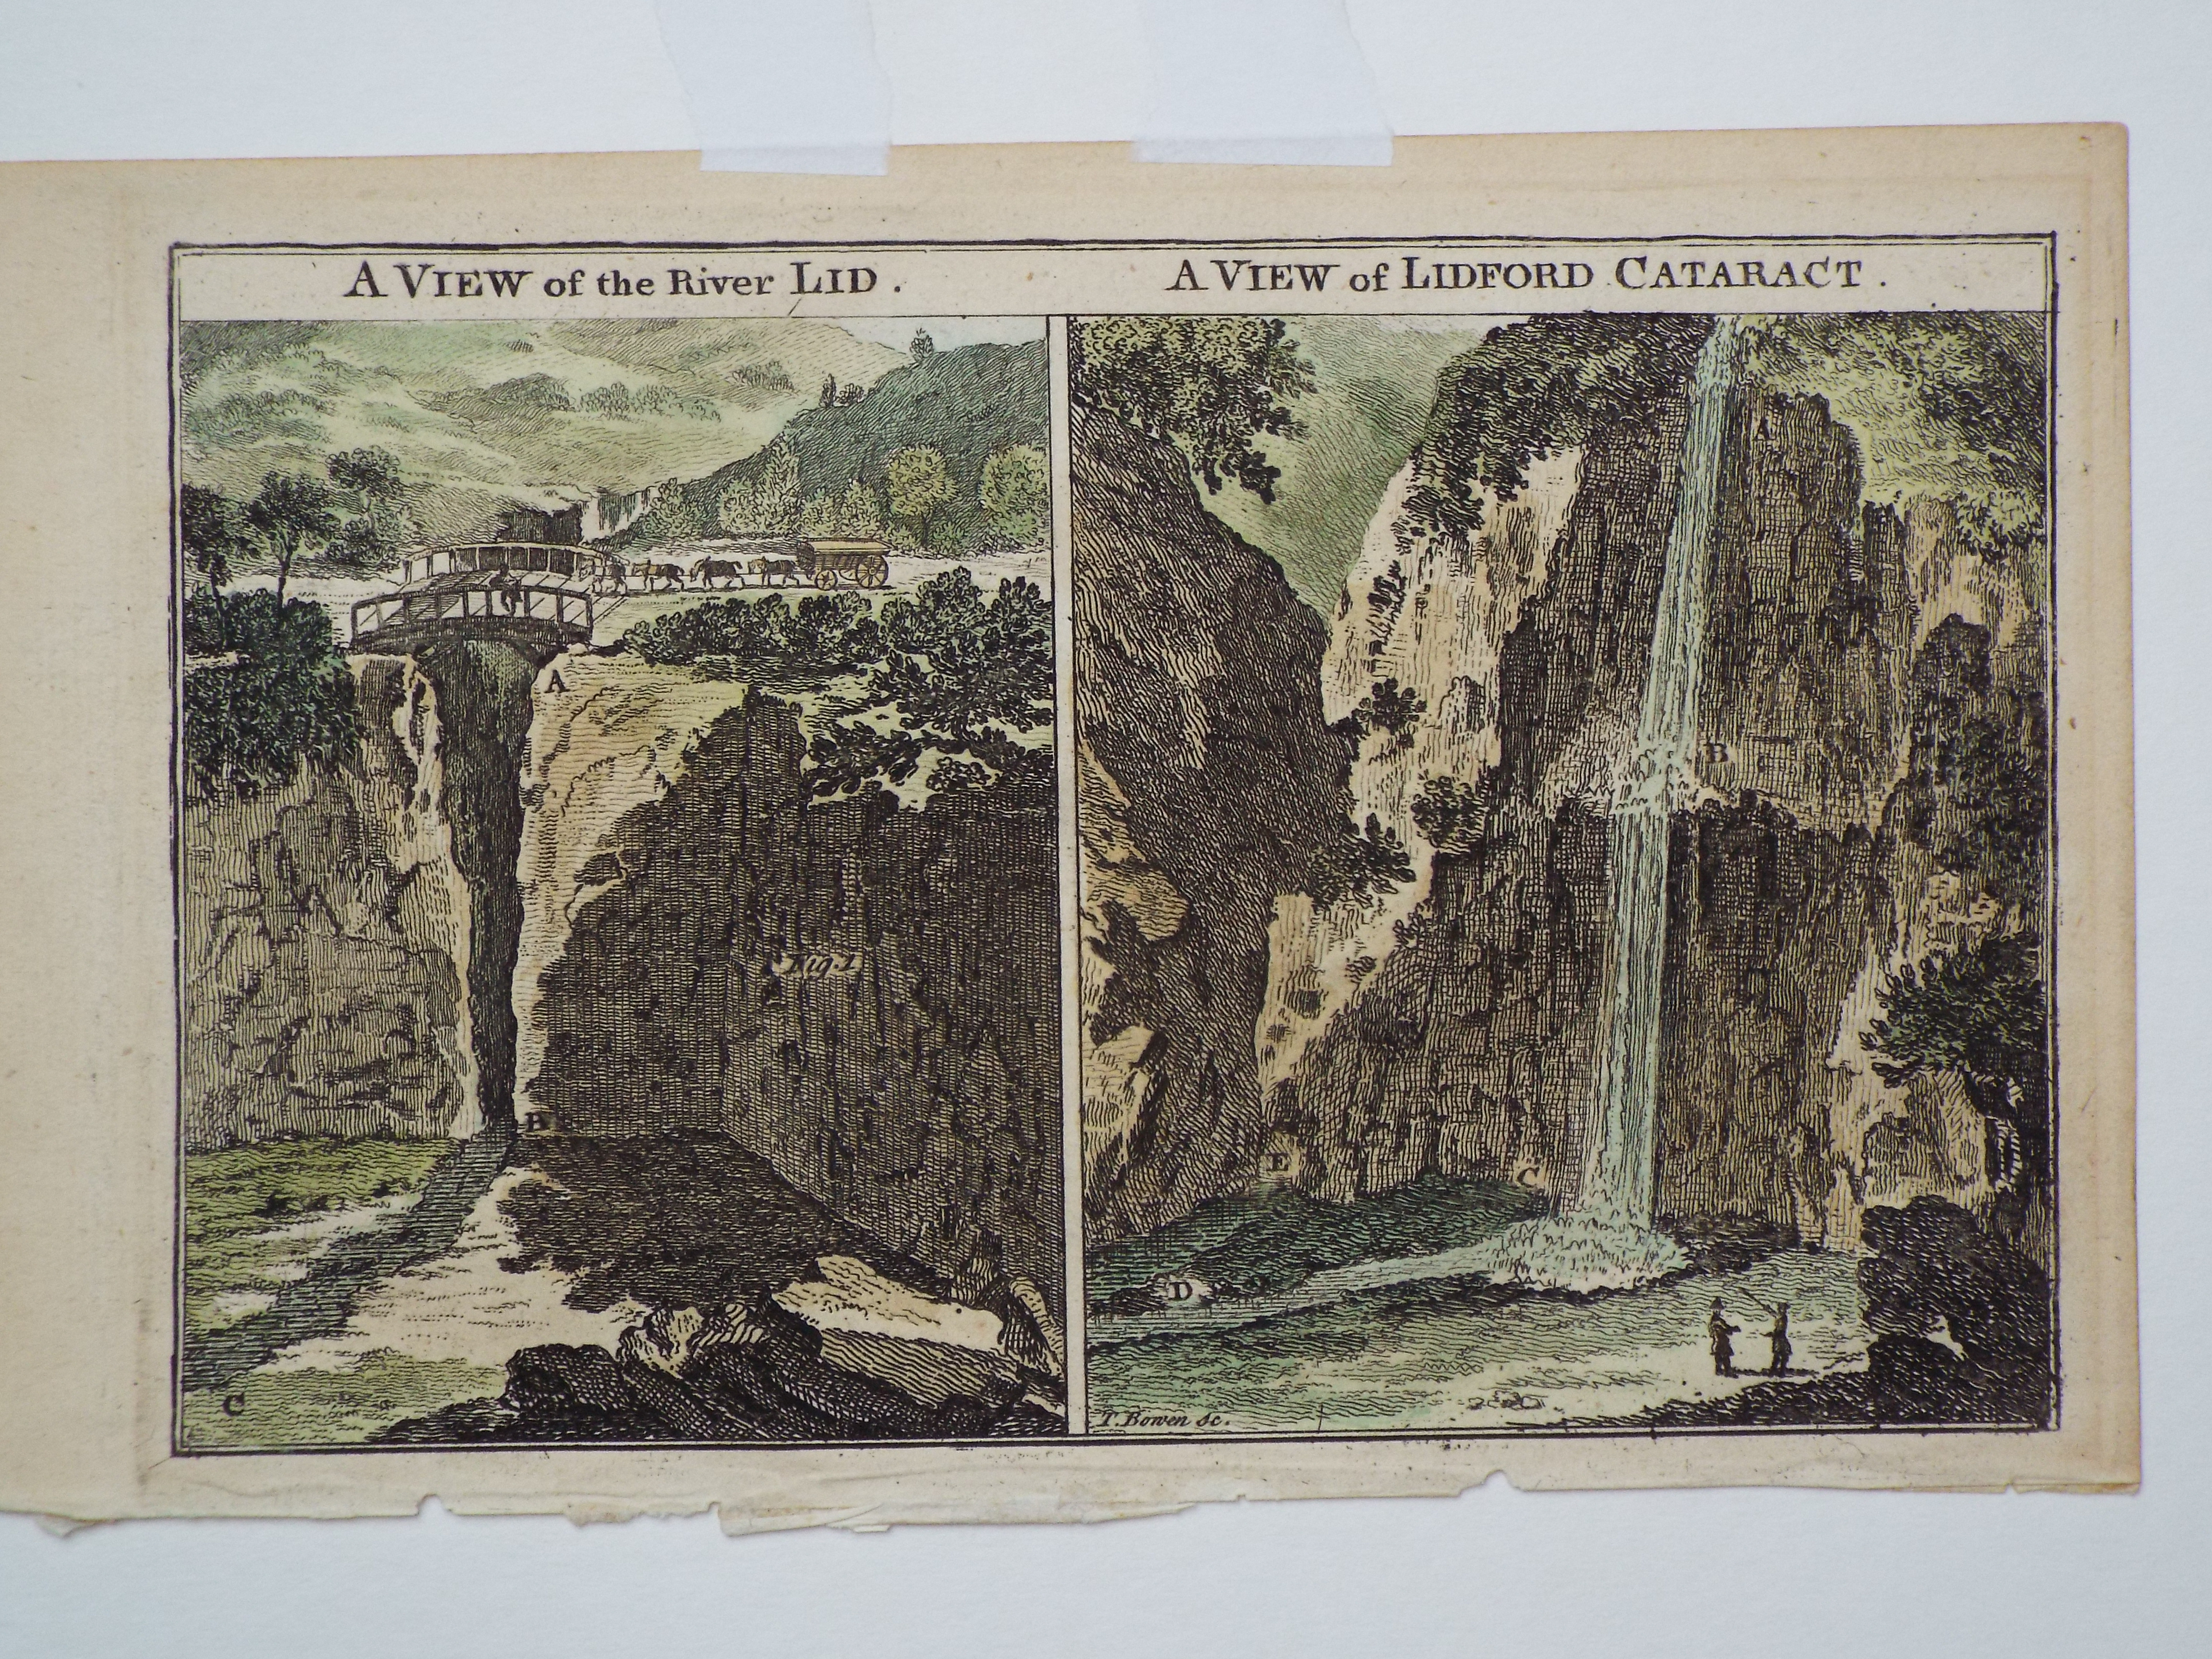 Print - A View of the River Lid. A View of Lidford Cataract - Bowen